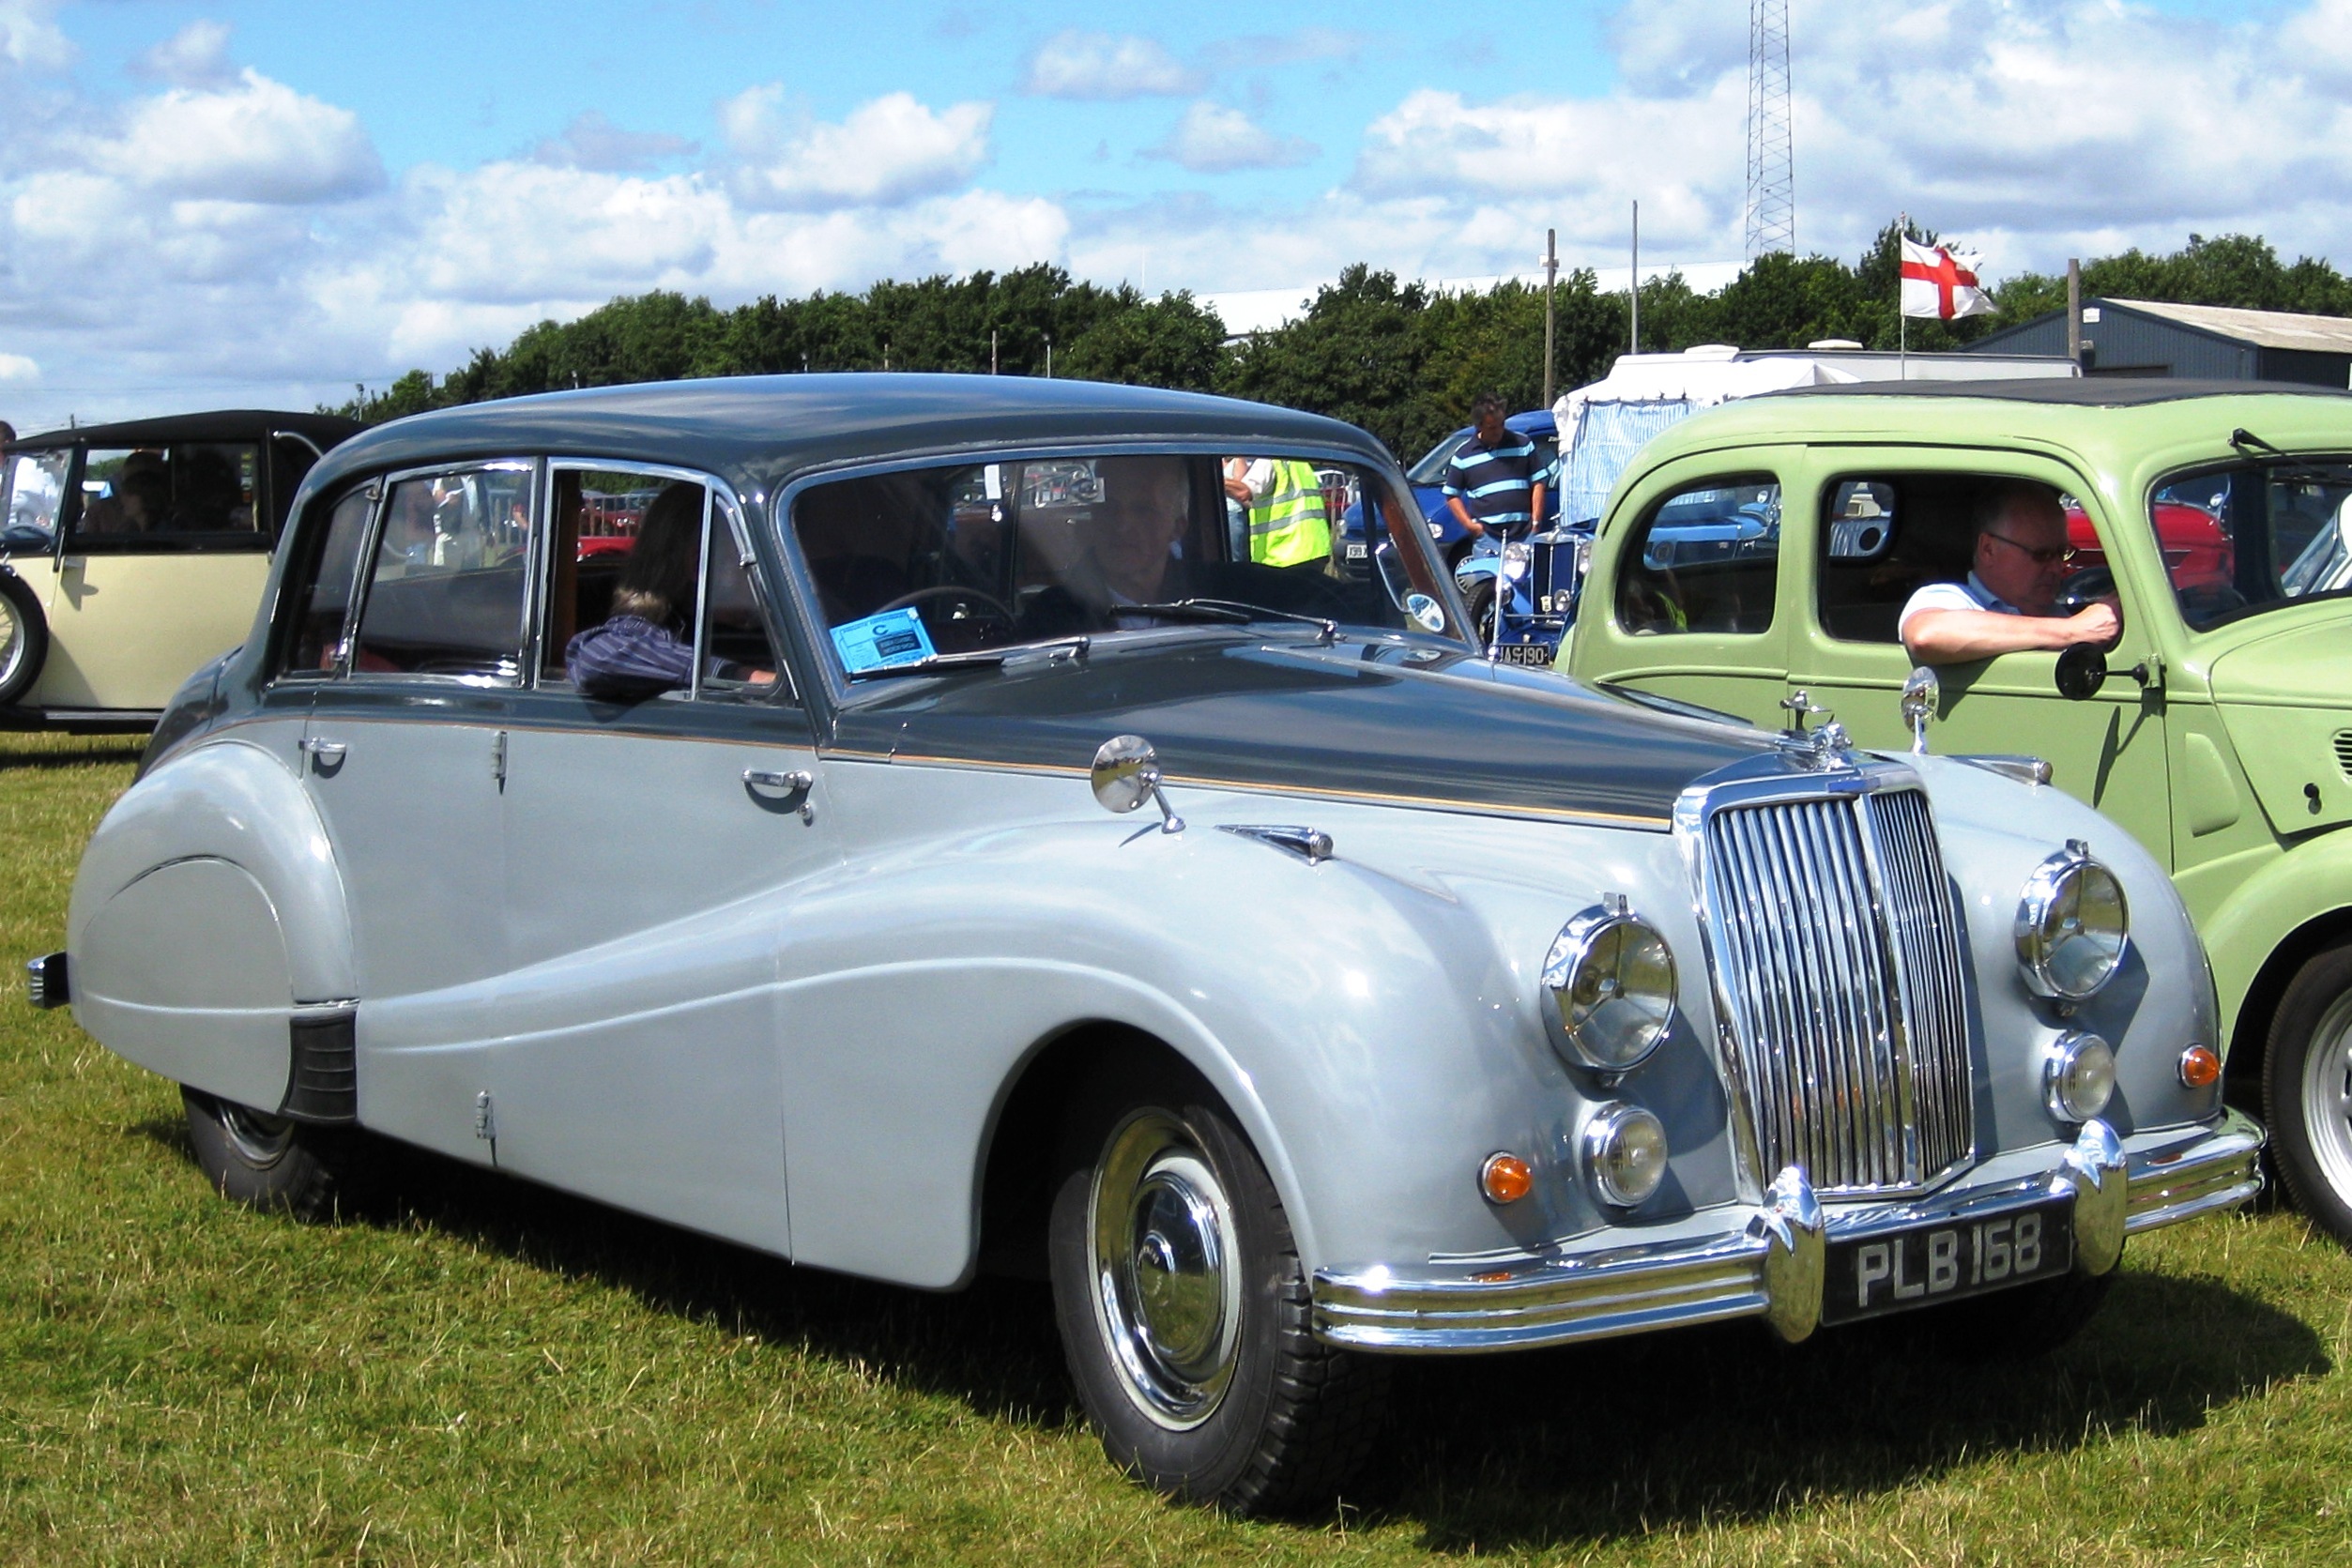 File:Armstrong-Siddeley Sapphire Billericay.JPG - Wikimedia Commons